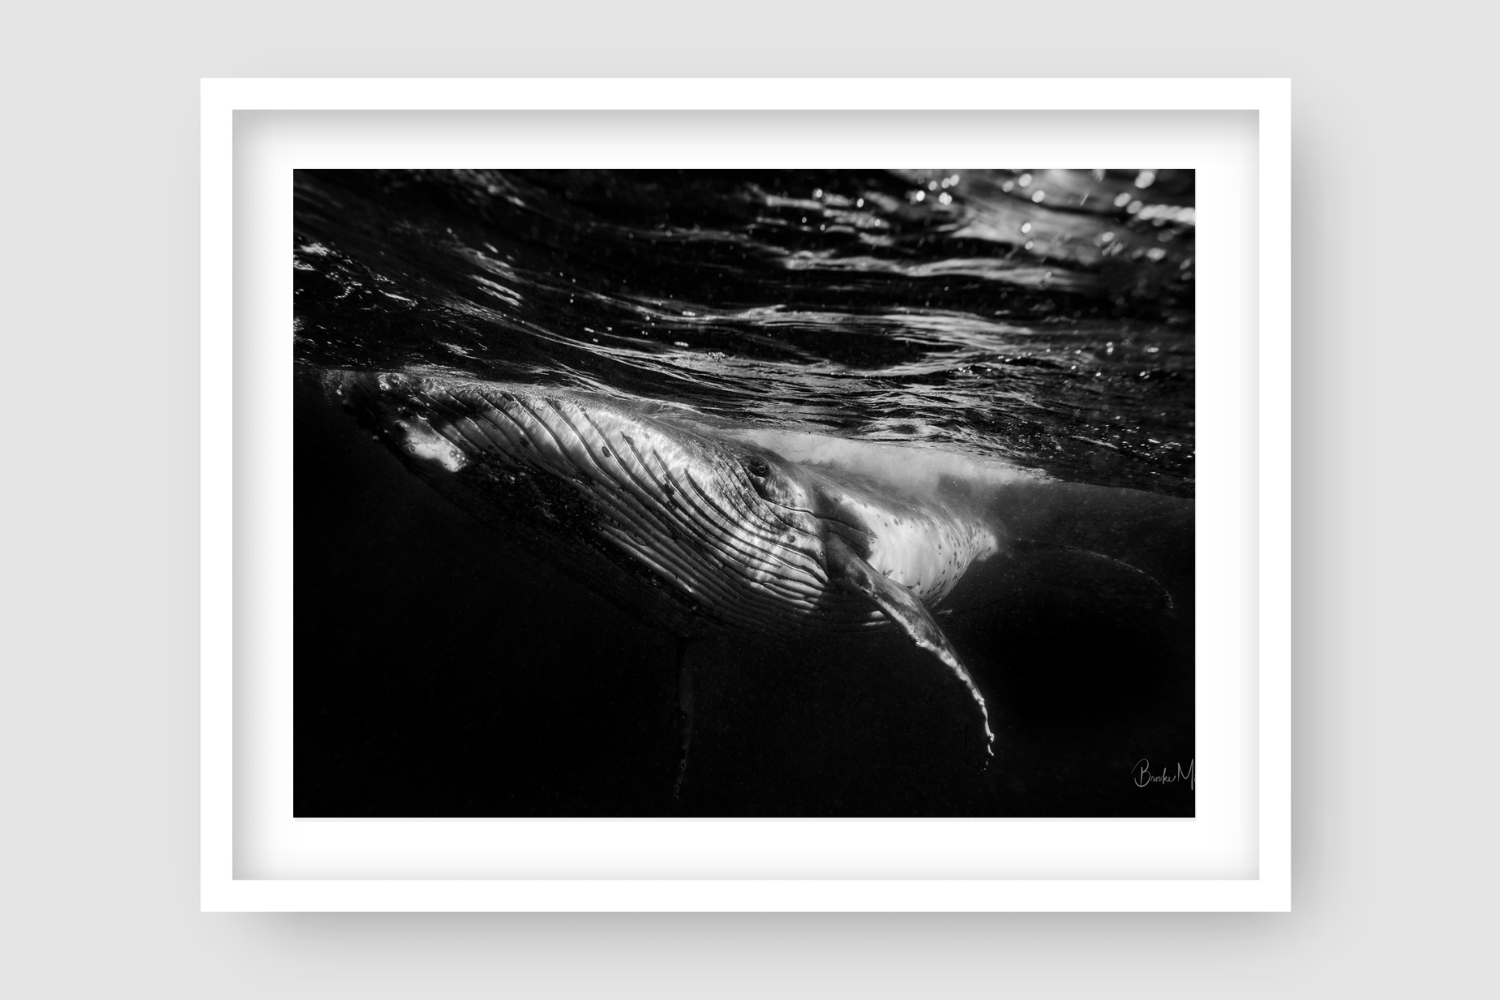 black and white image of large humpback whale breaking the surface of the water